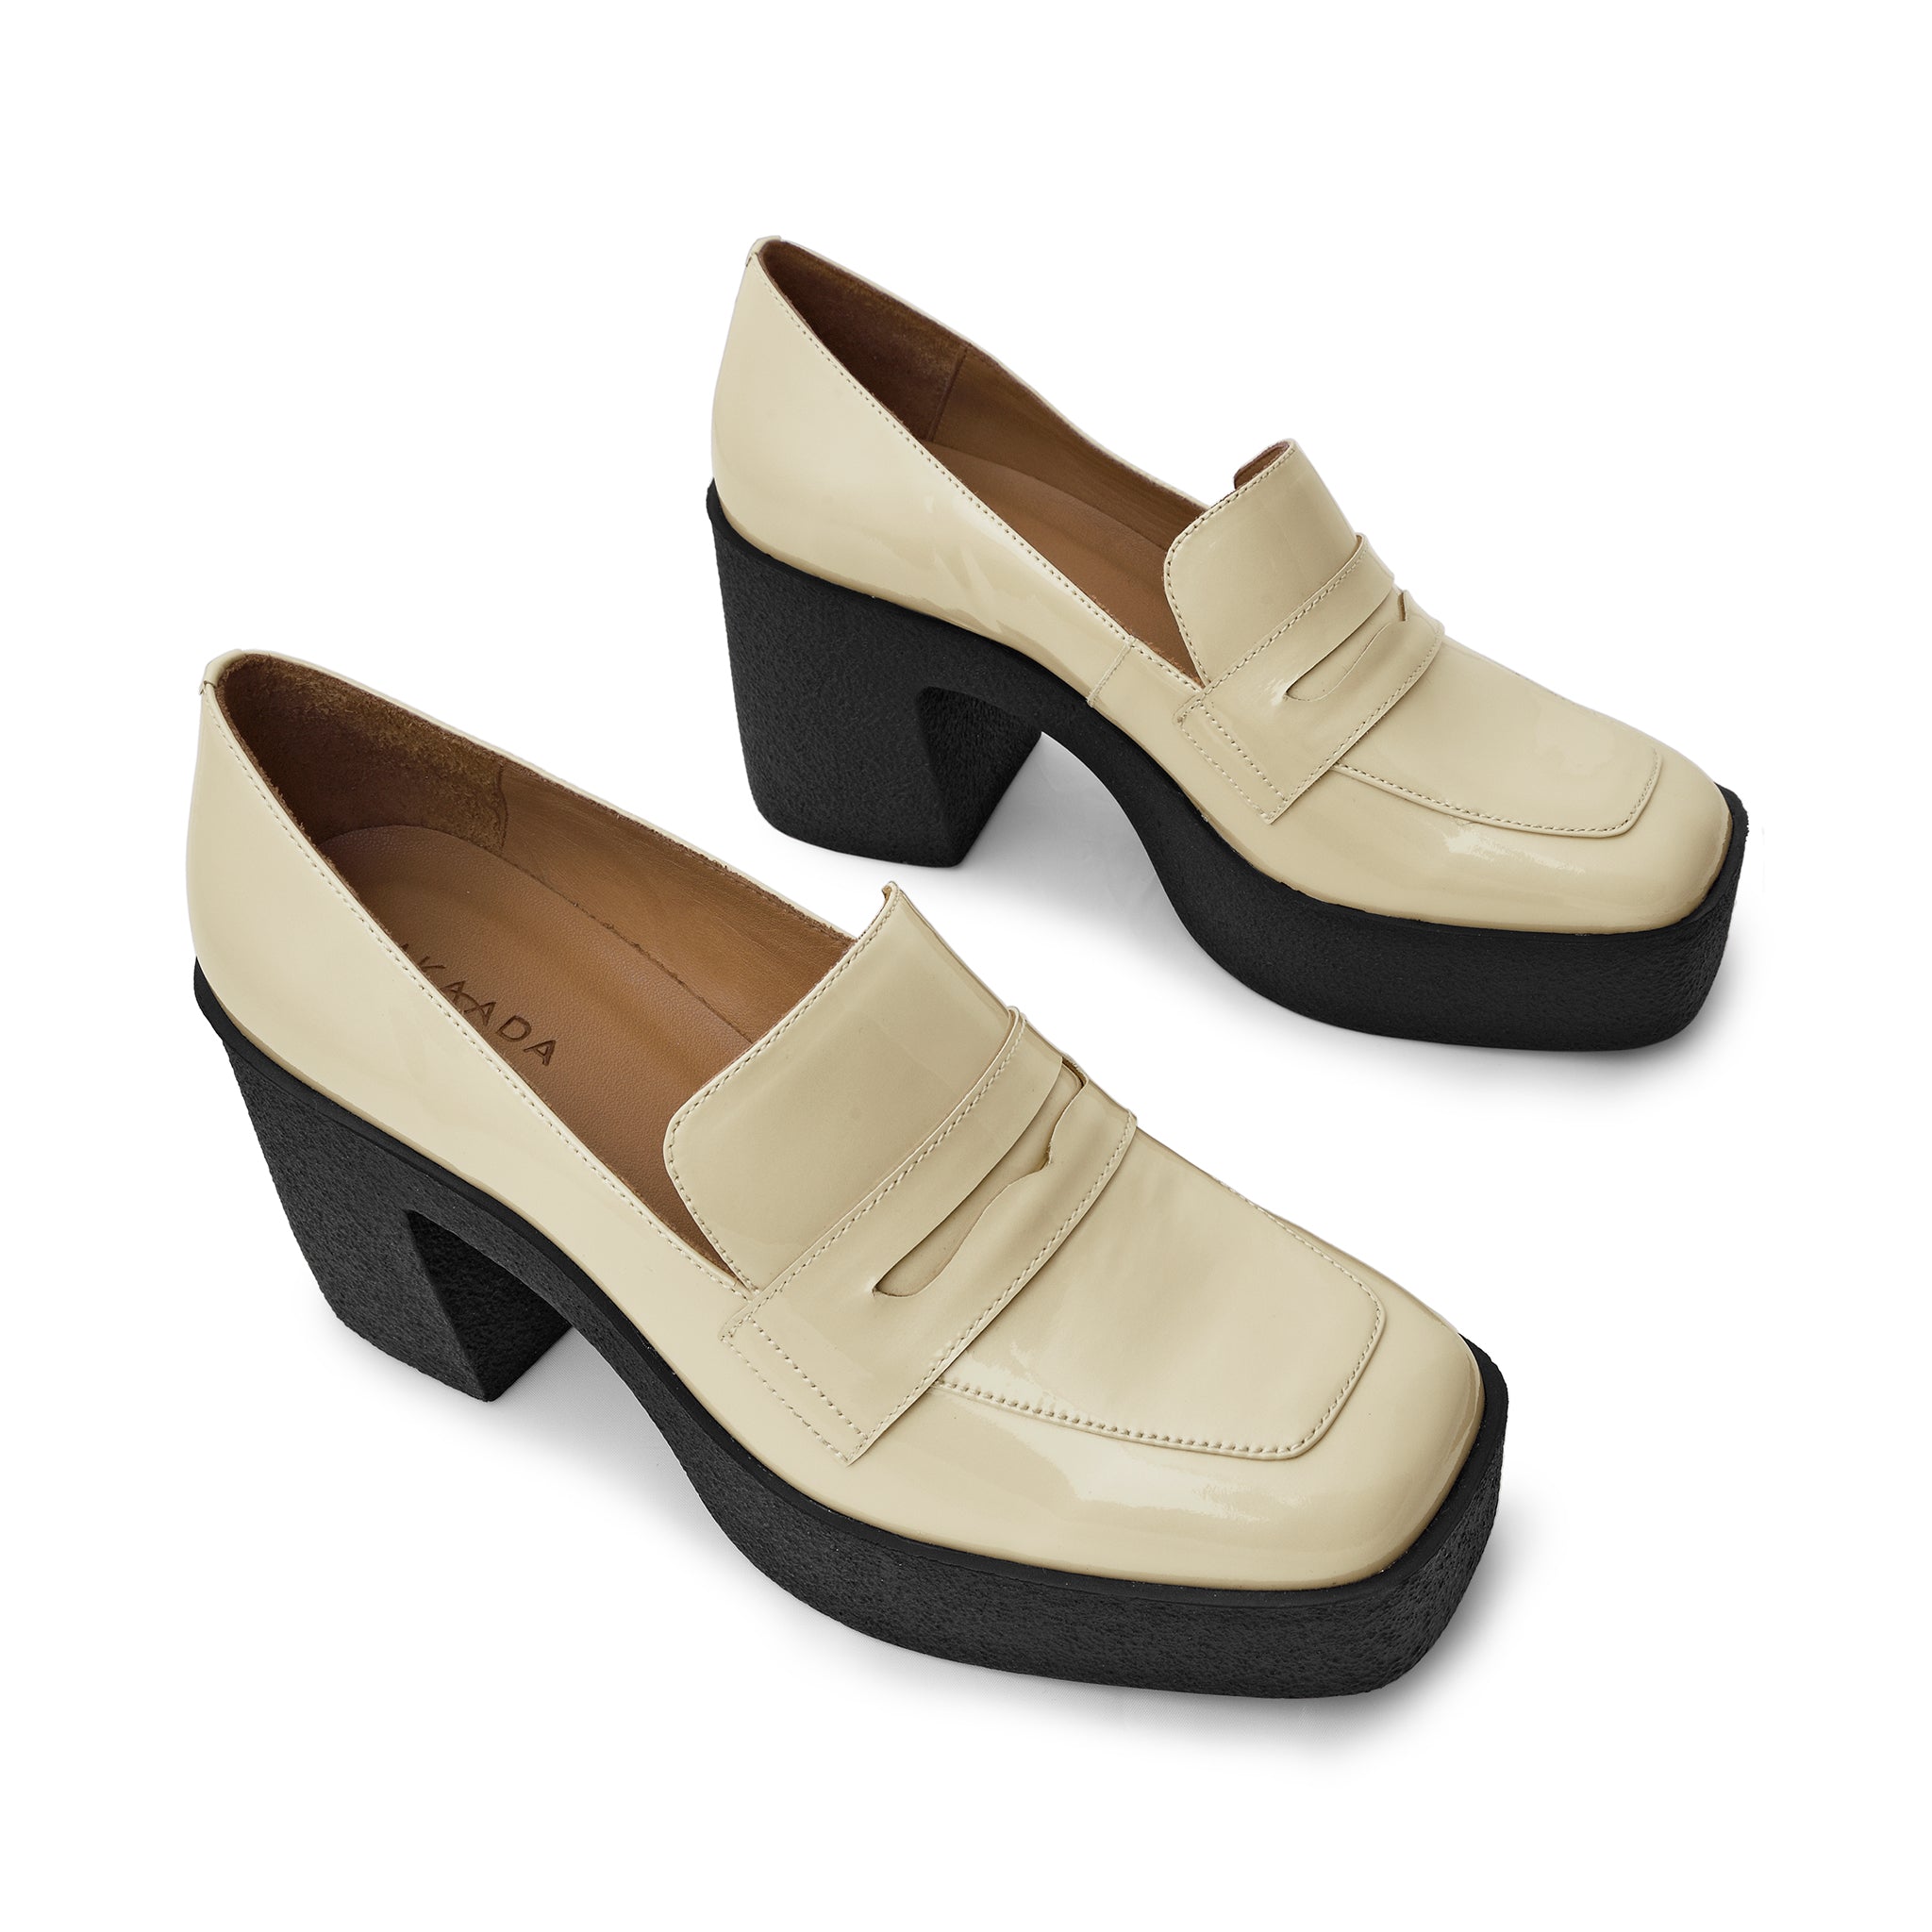 Yoko Cream Patent Leather Chunky Loafers 21031-01-03 -8